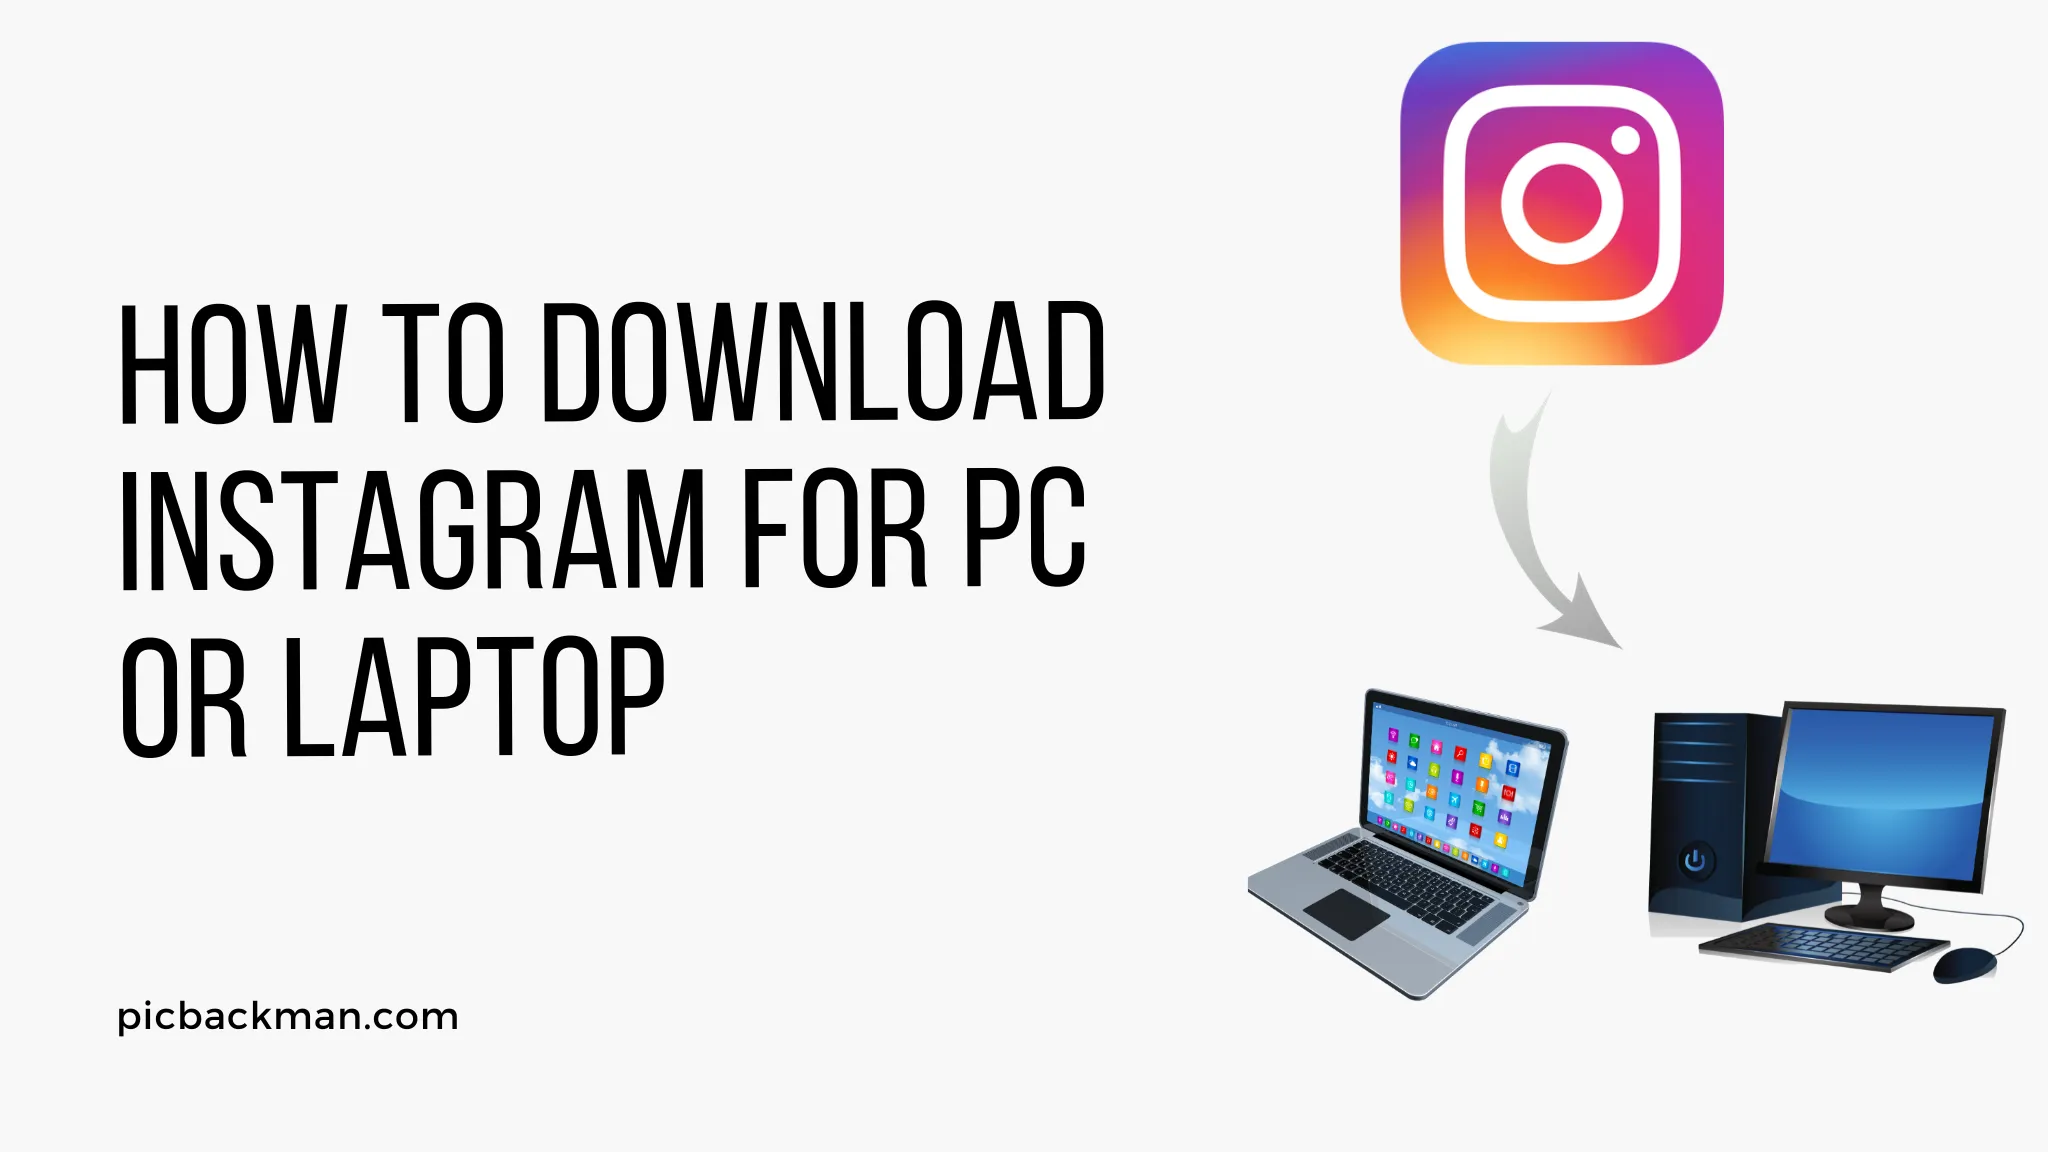 How to Download Instagram for PC or Laptop?